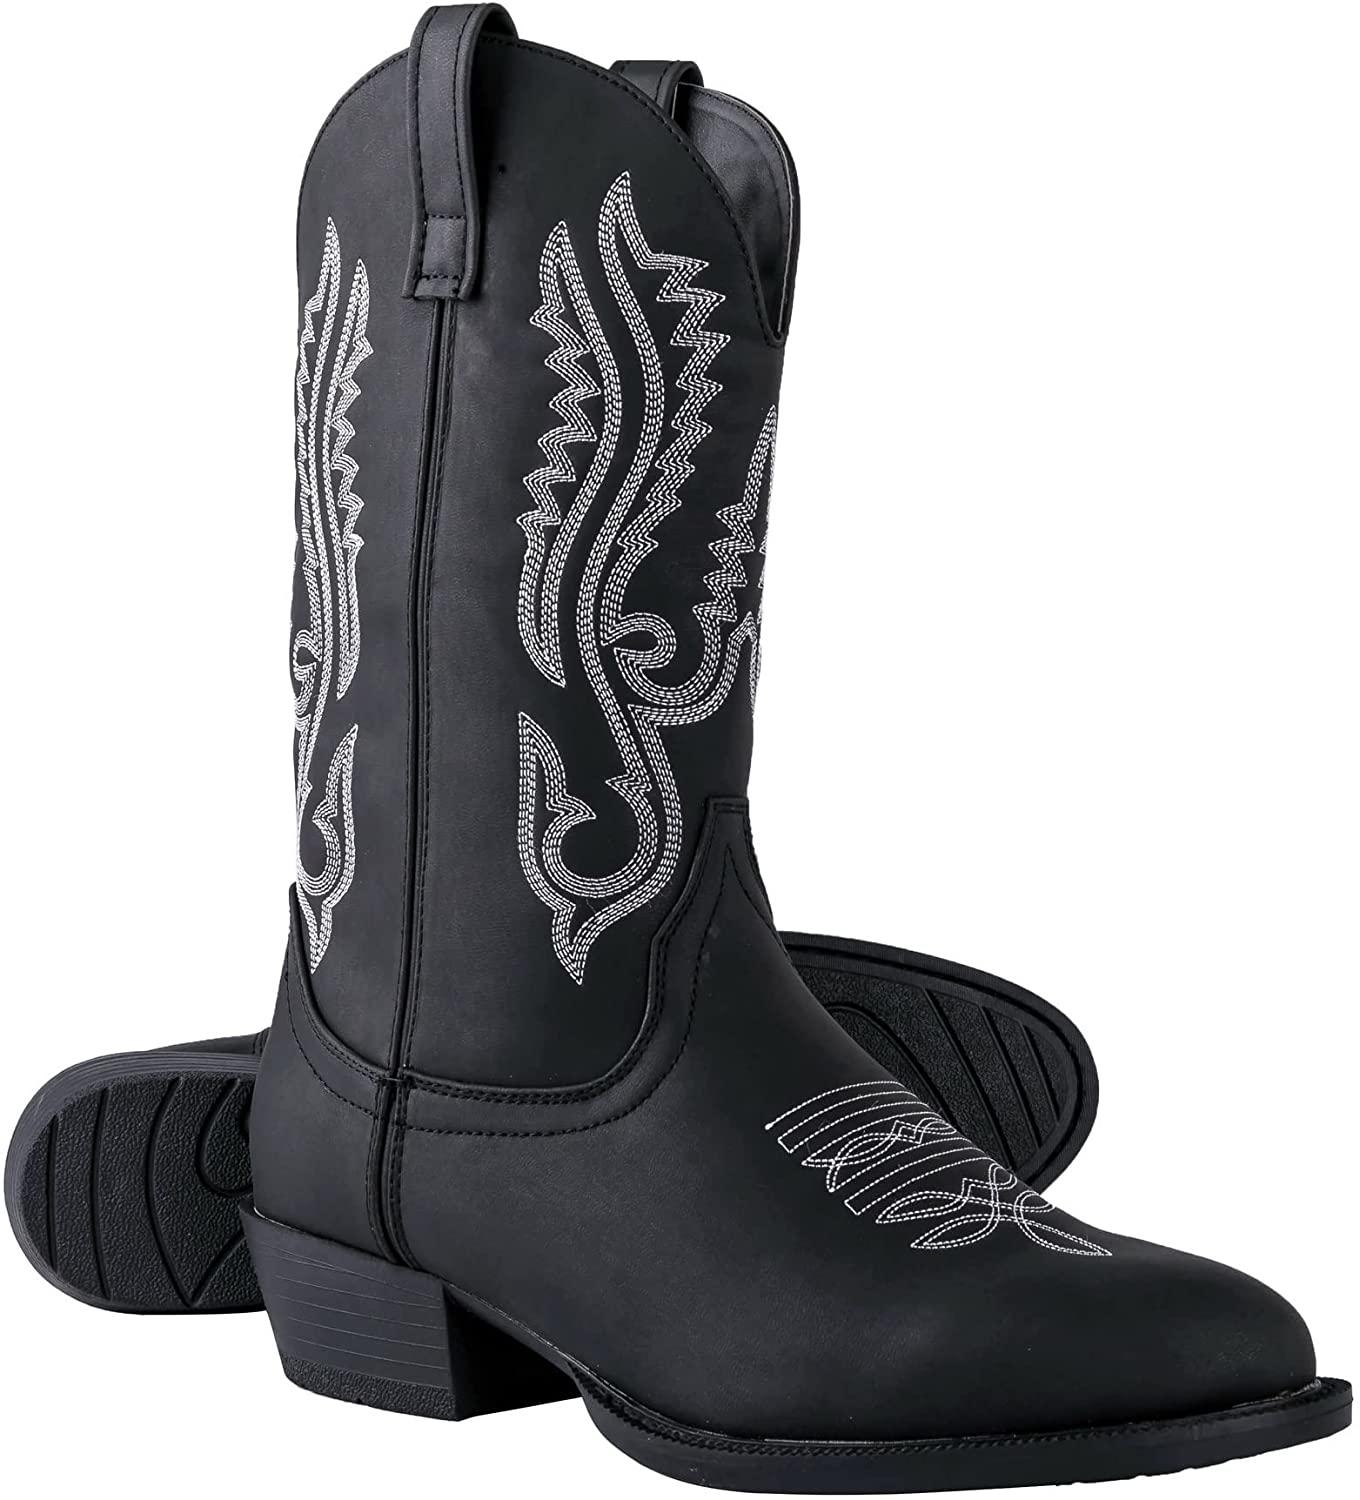 Canyon Trails classic round toe embroidered western rodeo cowboy boots 